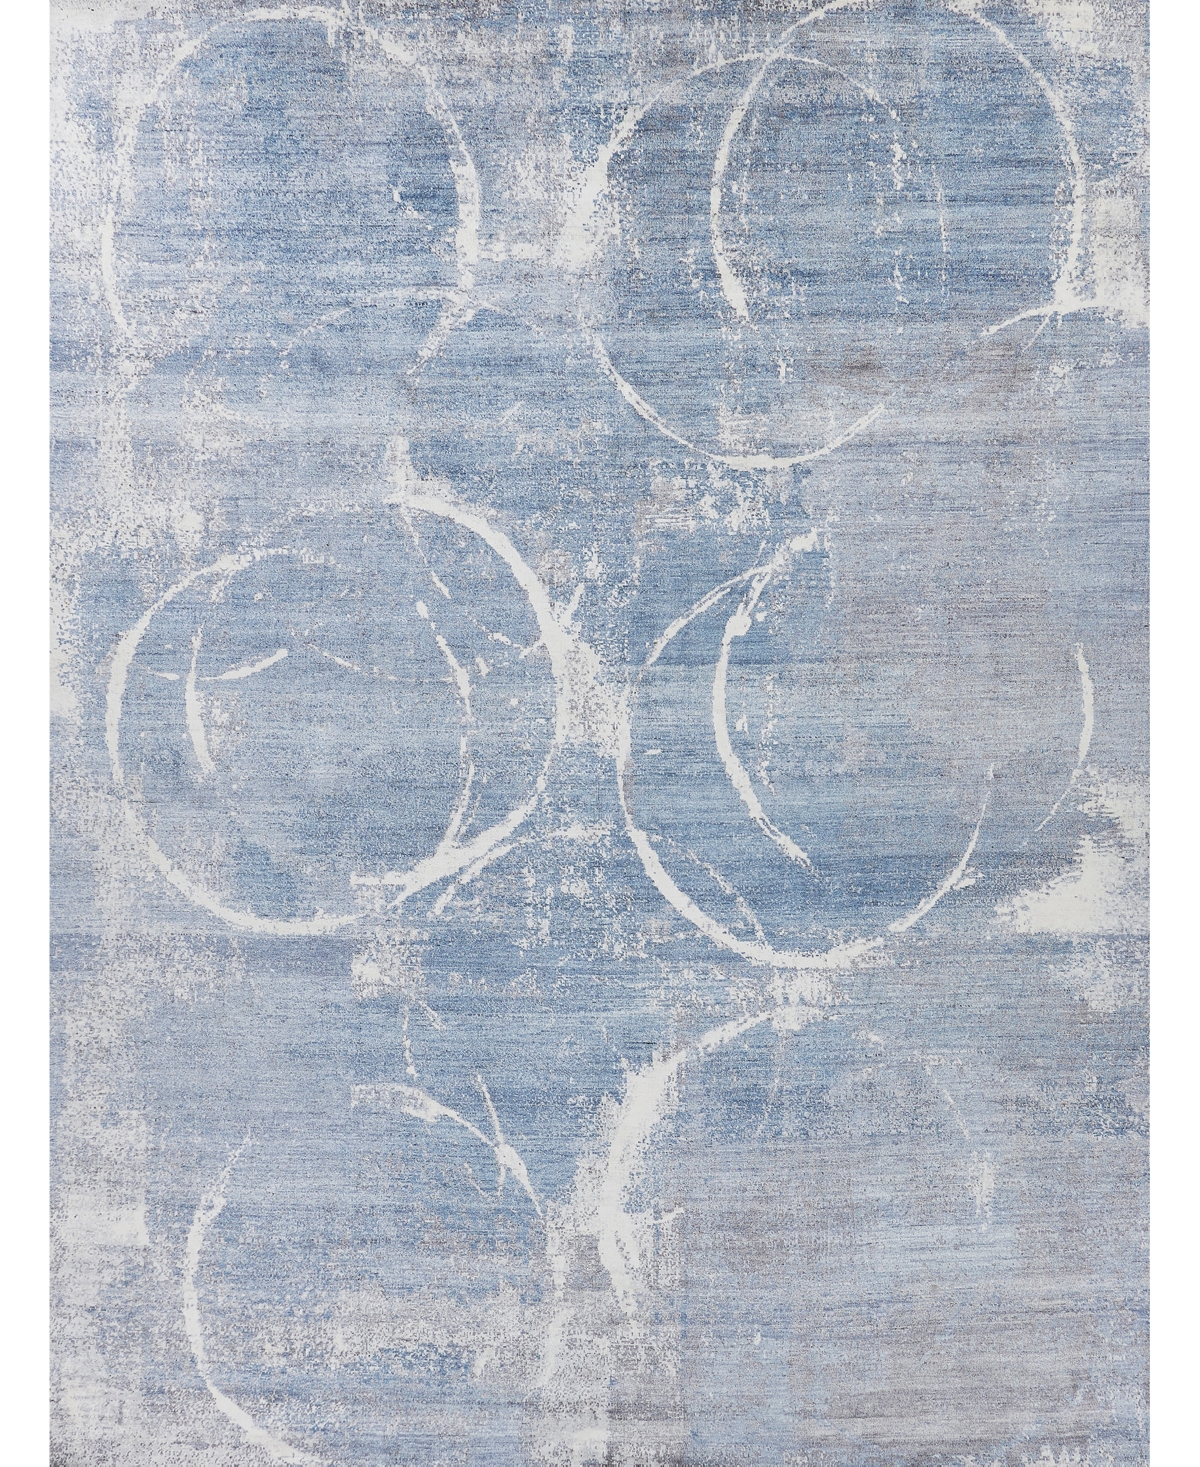 Exquisite Rugs Fine Pure Silk MOS5225 9' x 12' Area Rug - Blue, Gray